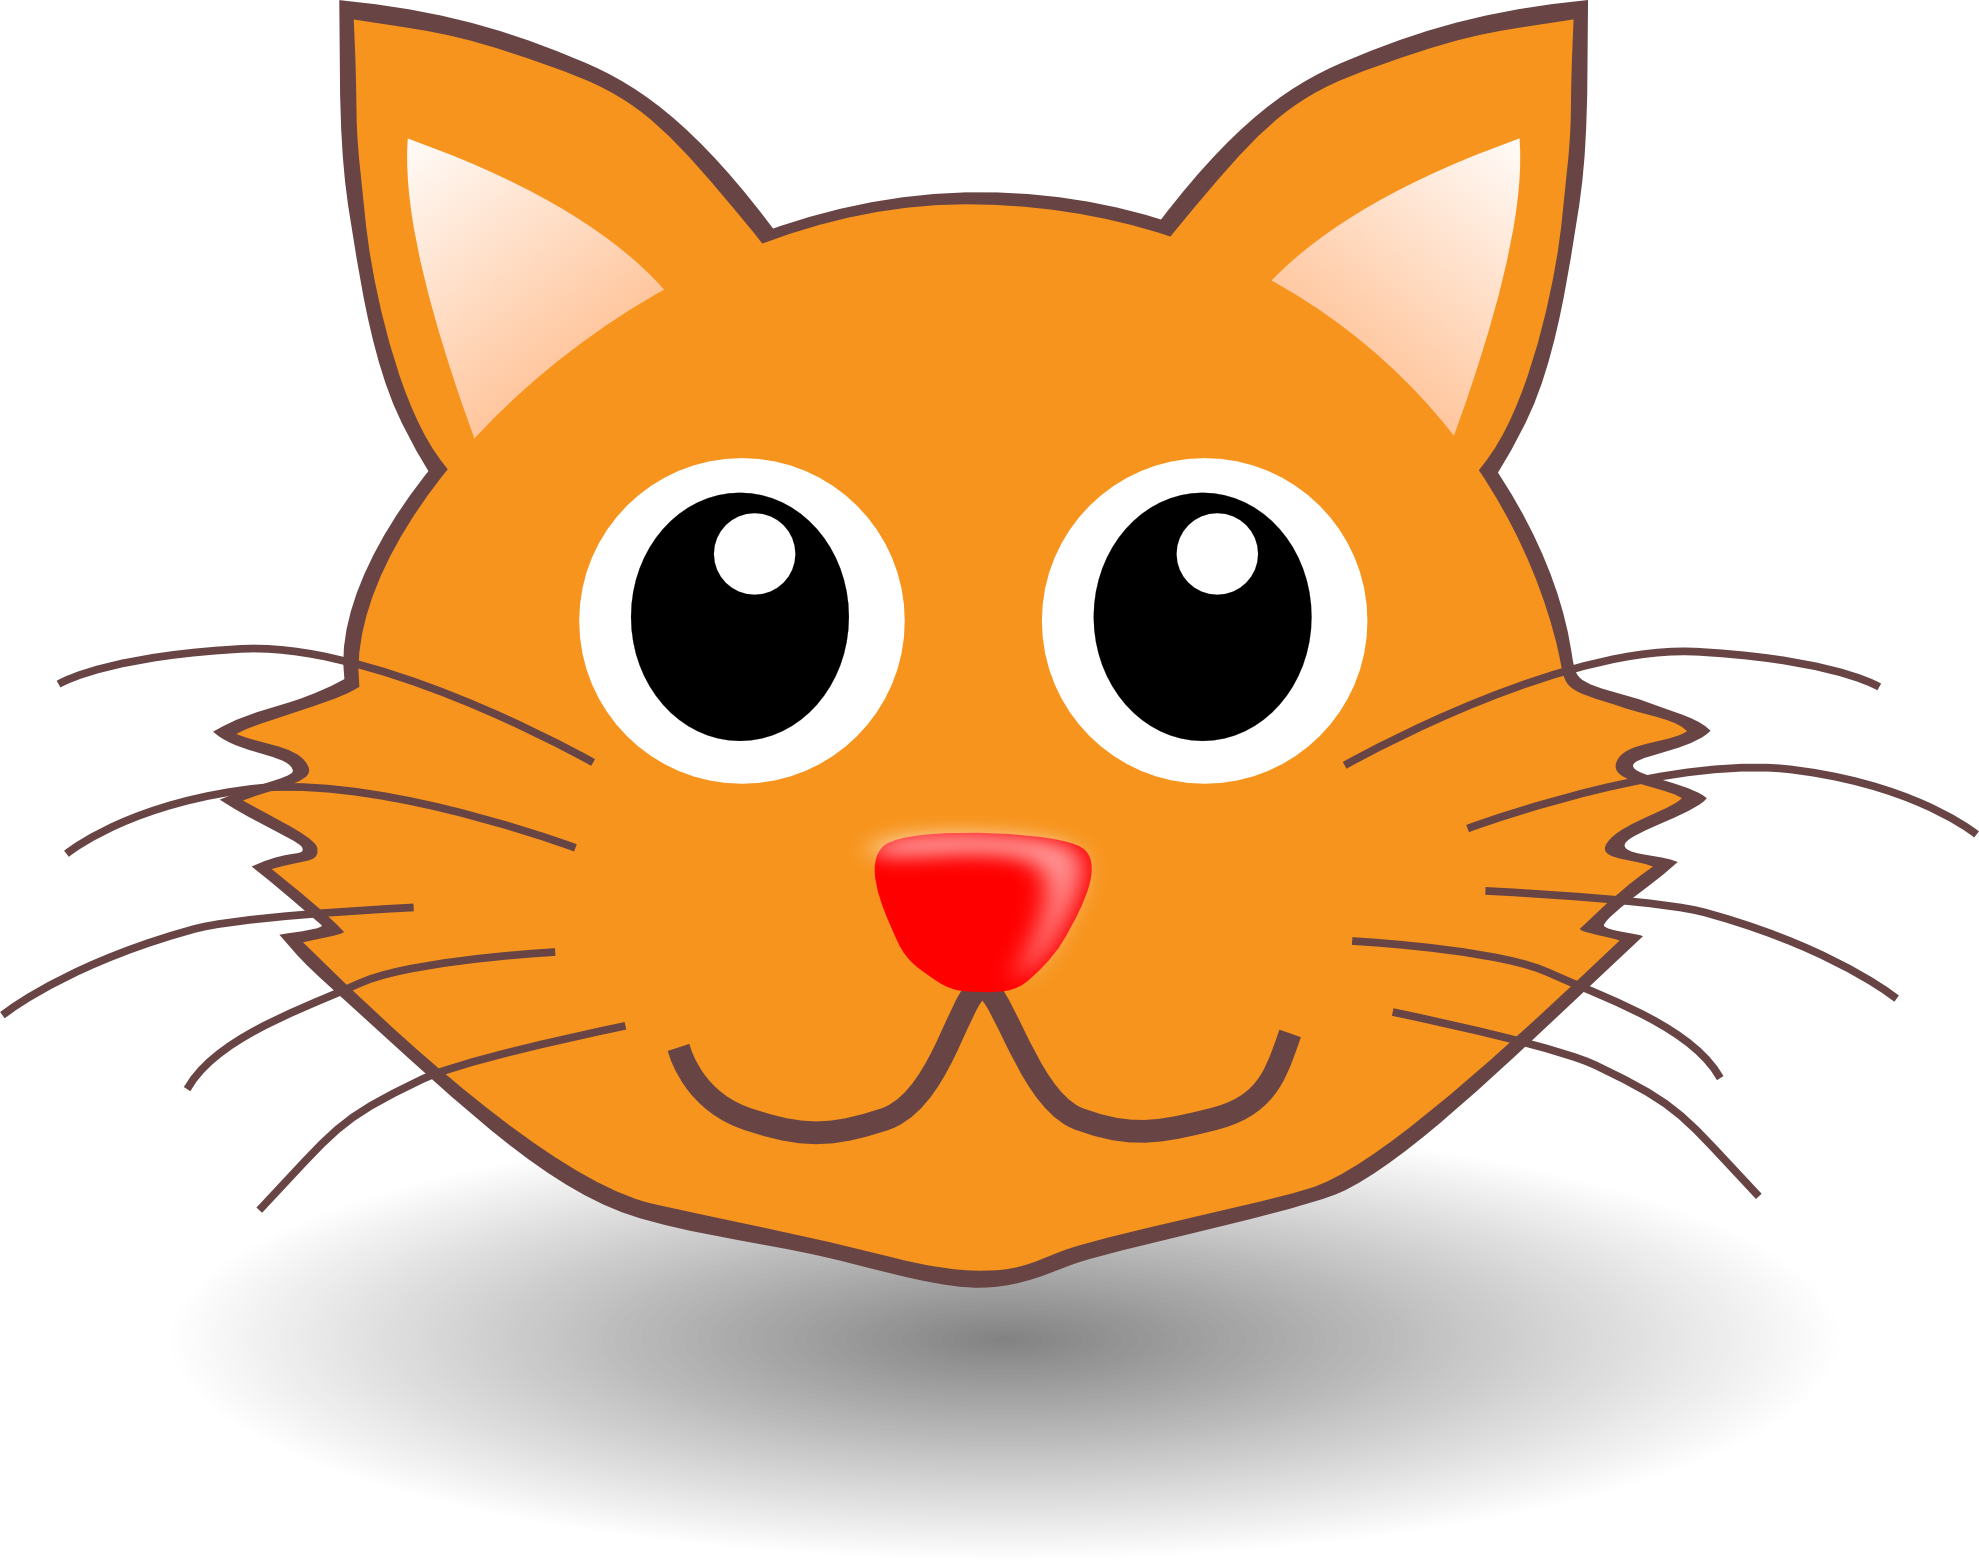 Free cartoon image download. Kittens clipart whimsical cat